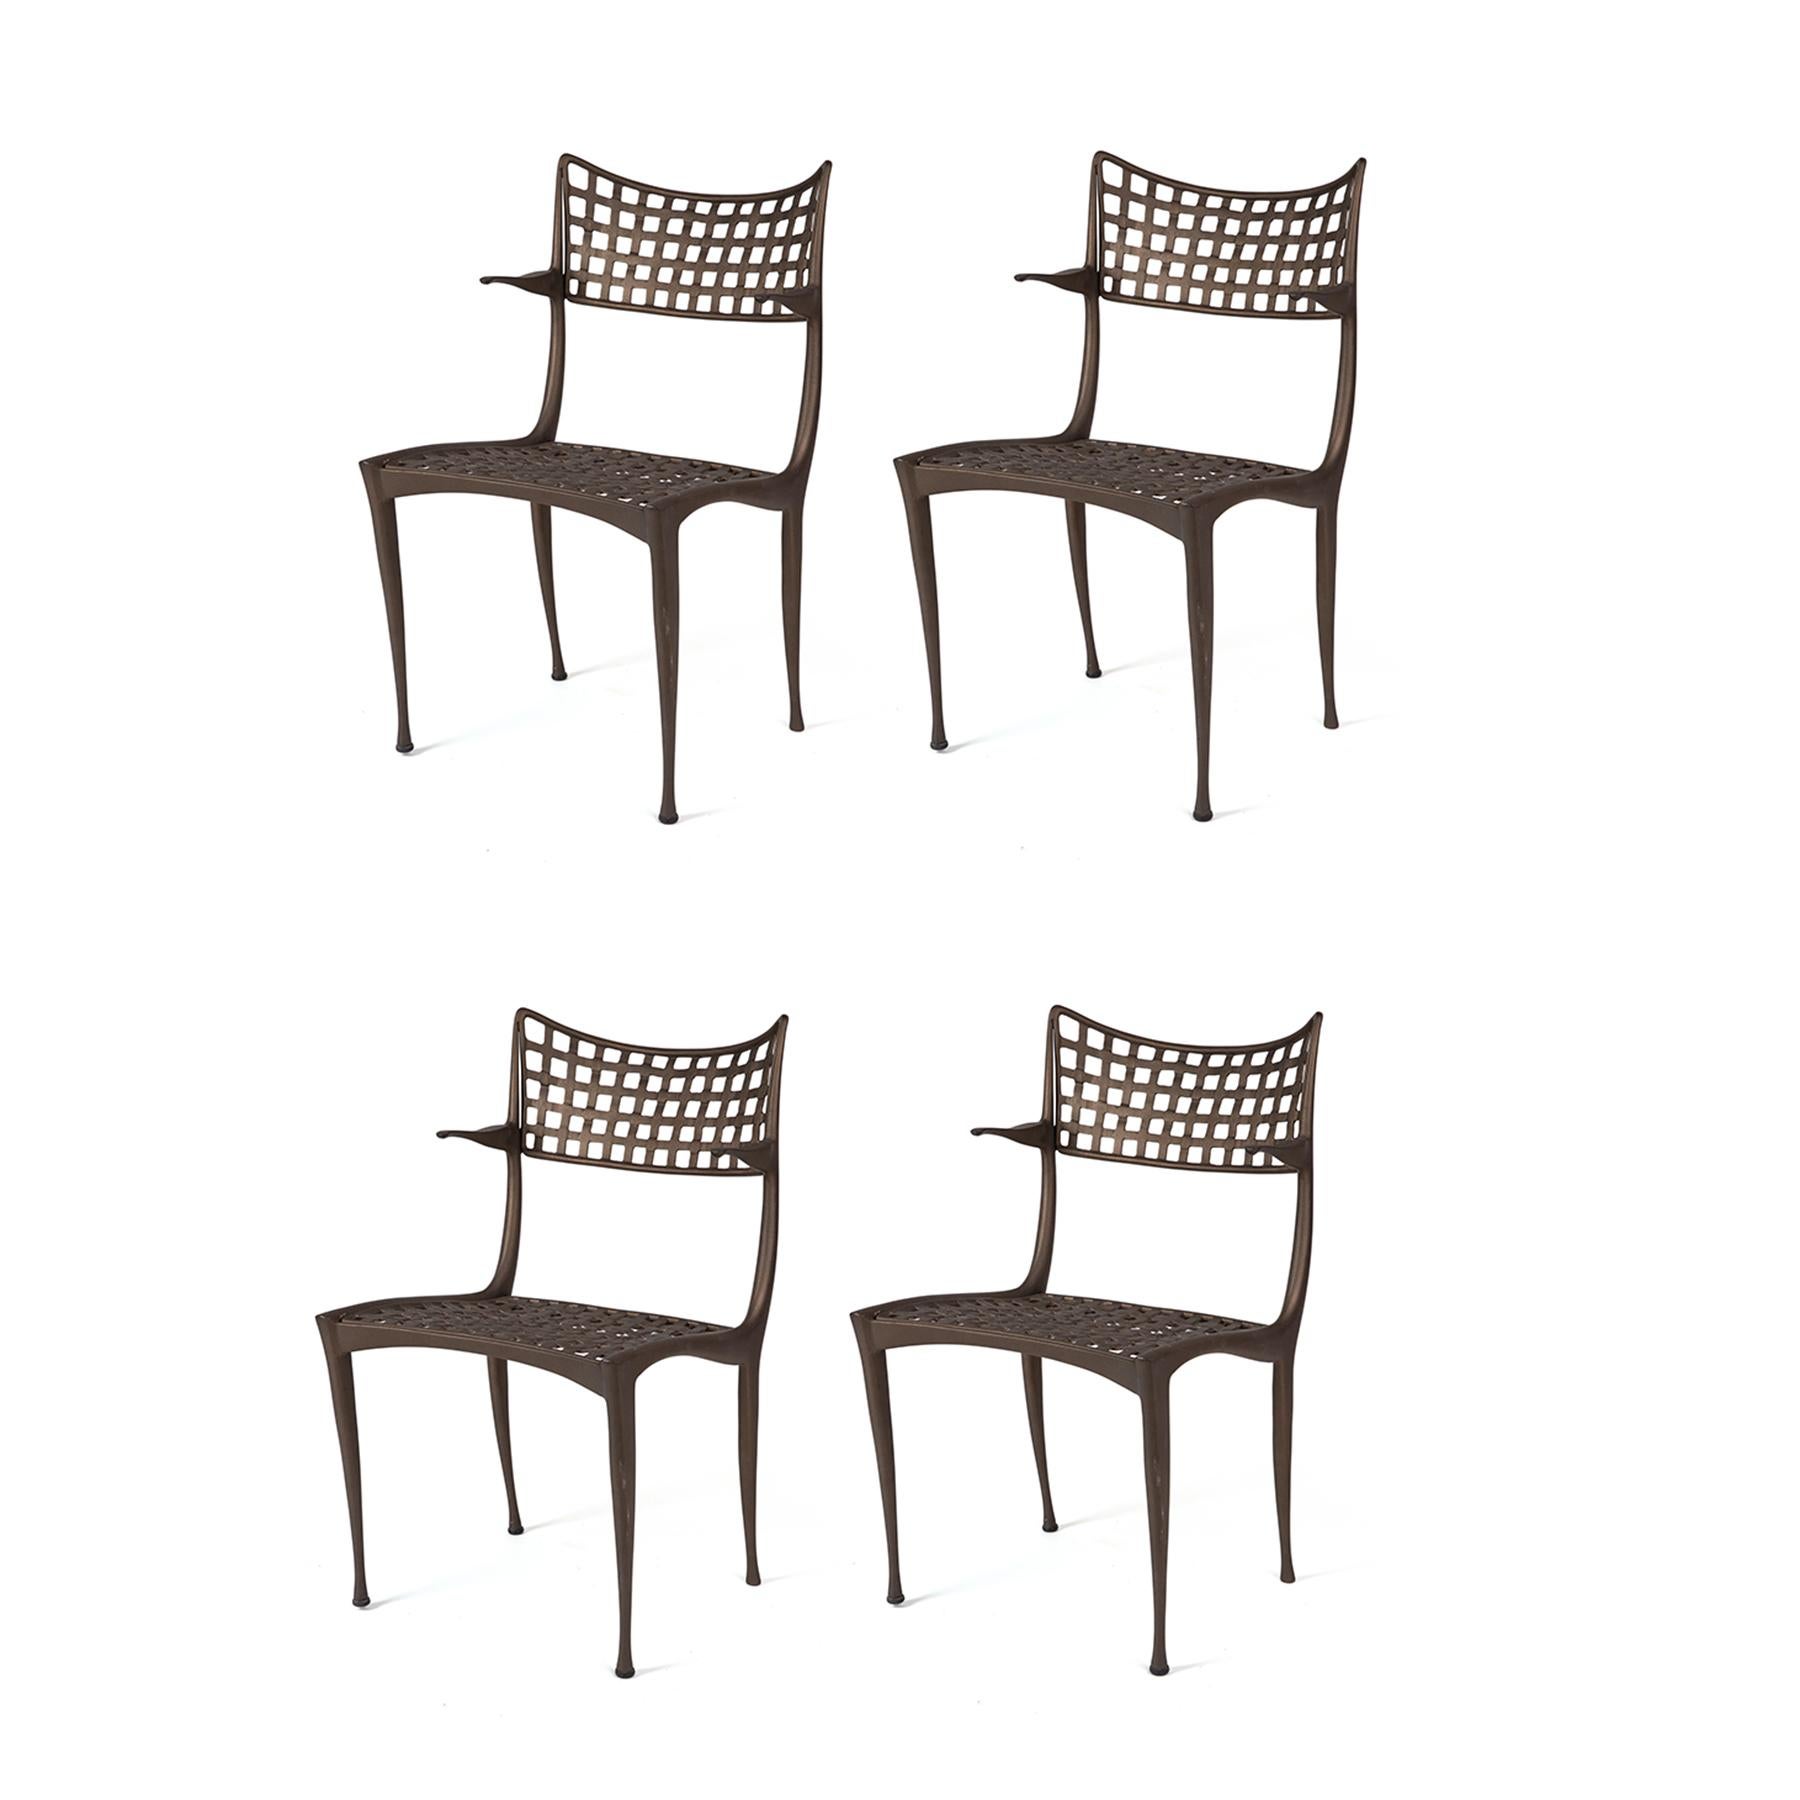 Suitable for indoor and outdoor use, these four wonderfully organic Sol Y Luna lounge chairs by Dan Johnson (an adaptation of Johnson's 1954 Gazelle Collection) feature a metal pattern that mimics woven caning. Price listed is for the 4 chairs.